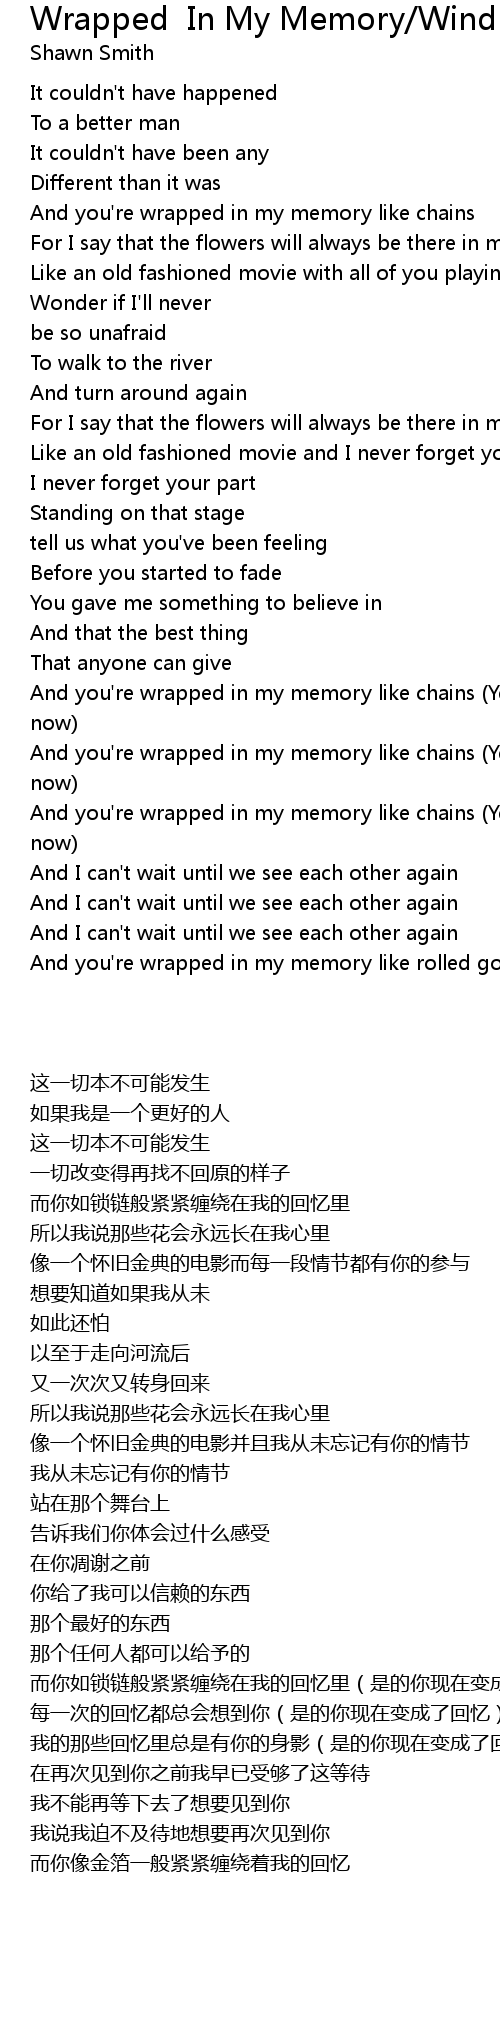 Wrapped In My Memory/Wind In Our Hair Lyrics - Follow Lyrics